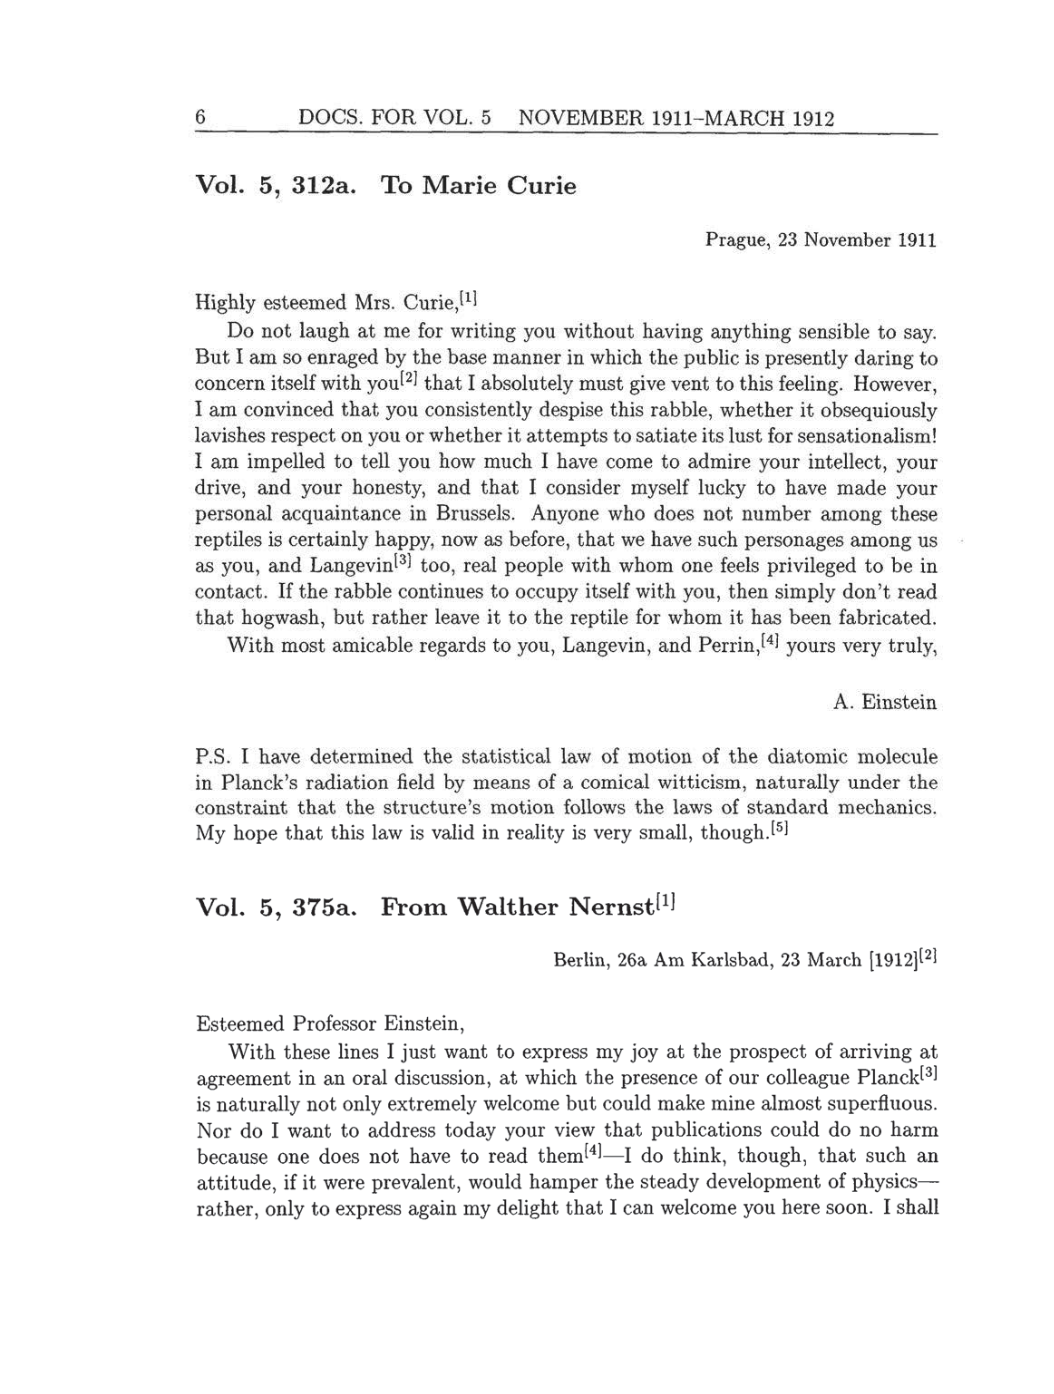 Volume 8: The Berlin Years: Correspondence, 1914-1918 (English translation supplement) page 6